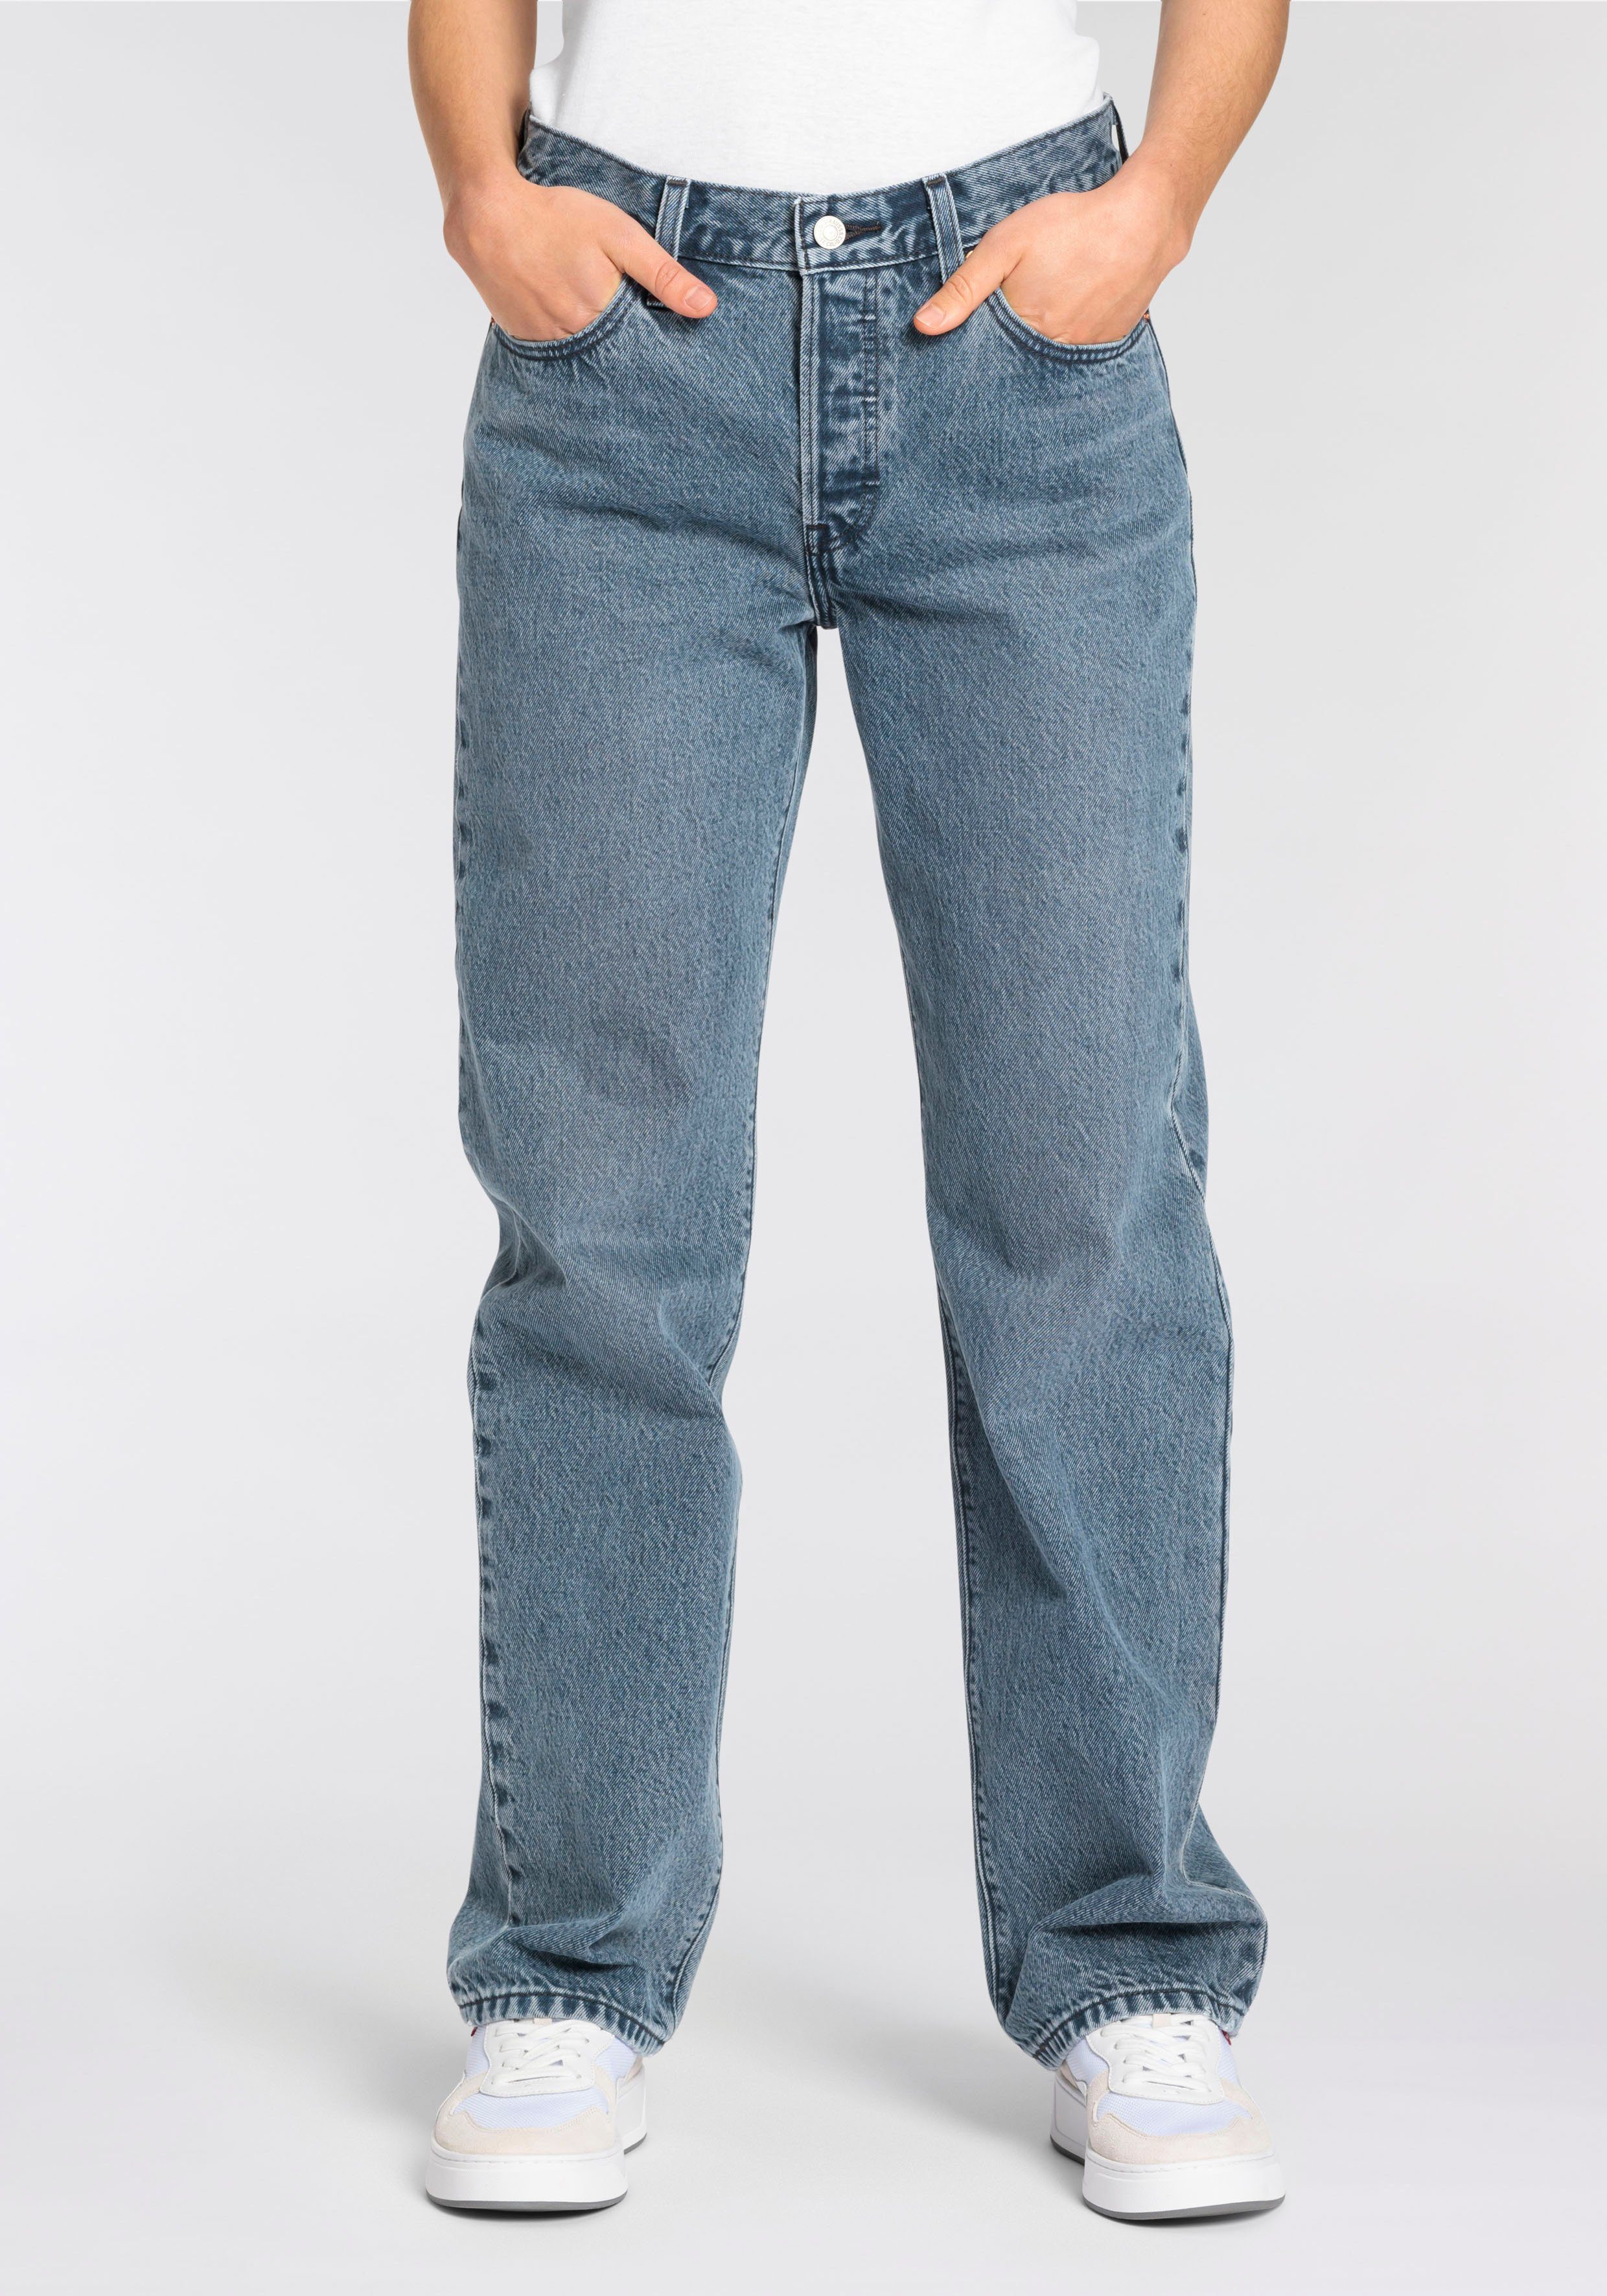 Jeans denim Weite 90'S multi Levi's® Collection 501 501